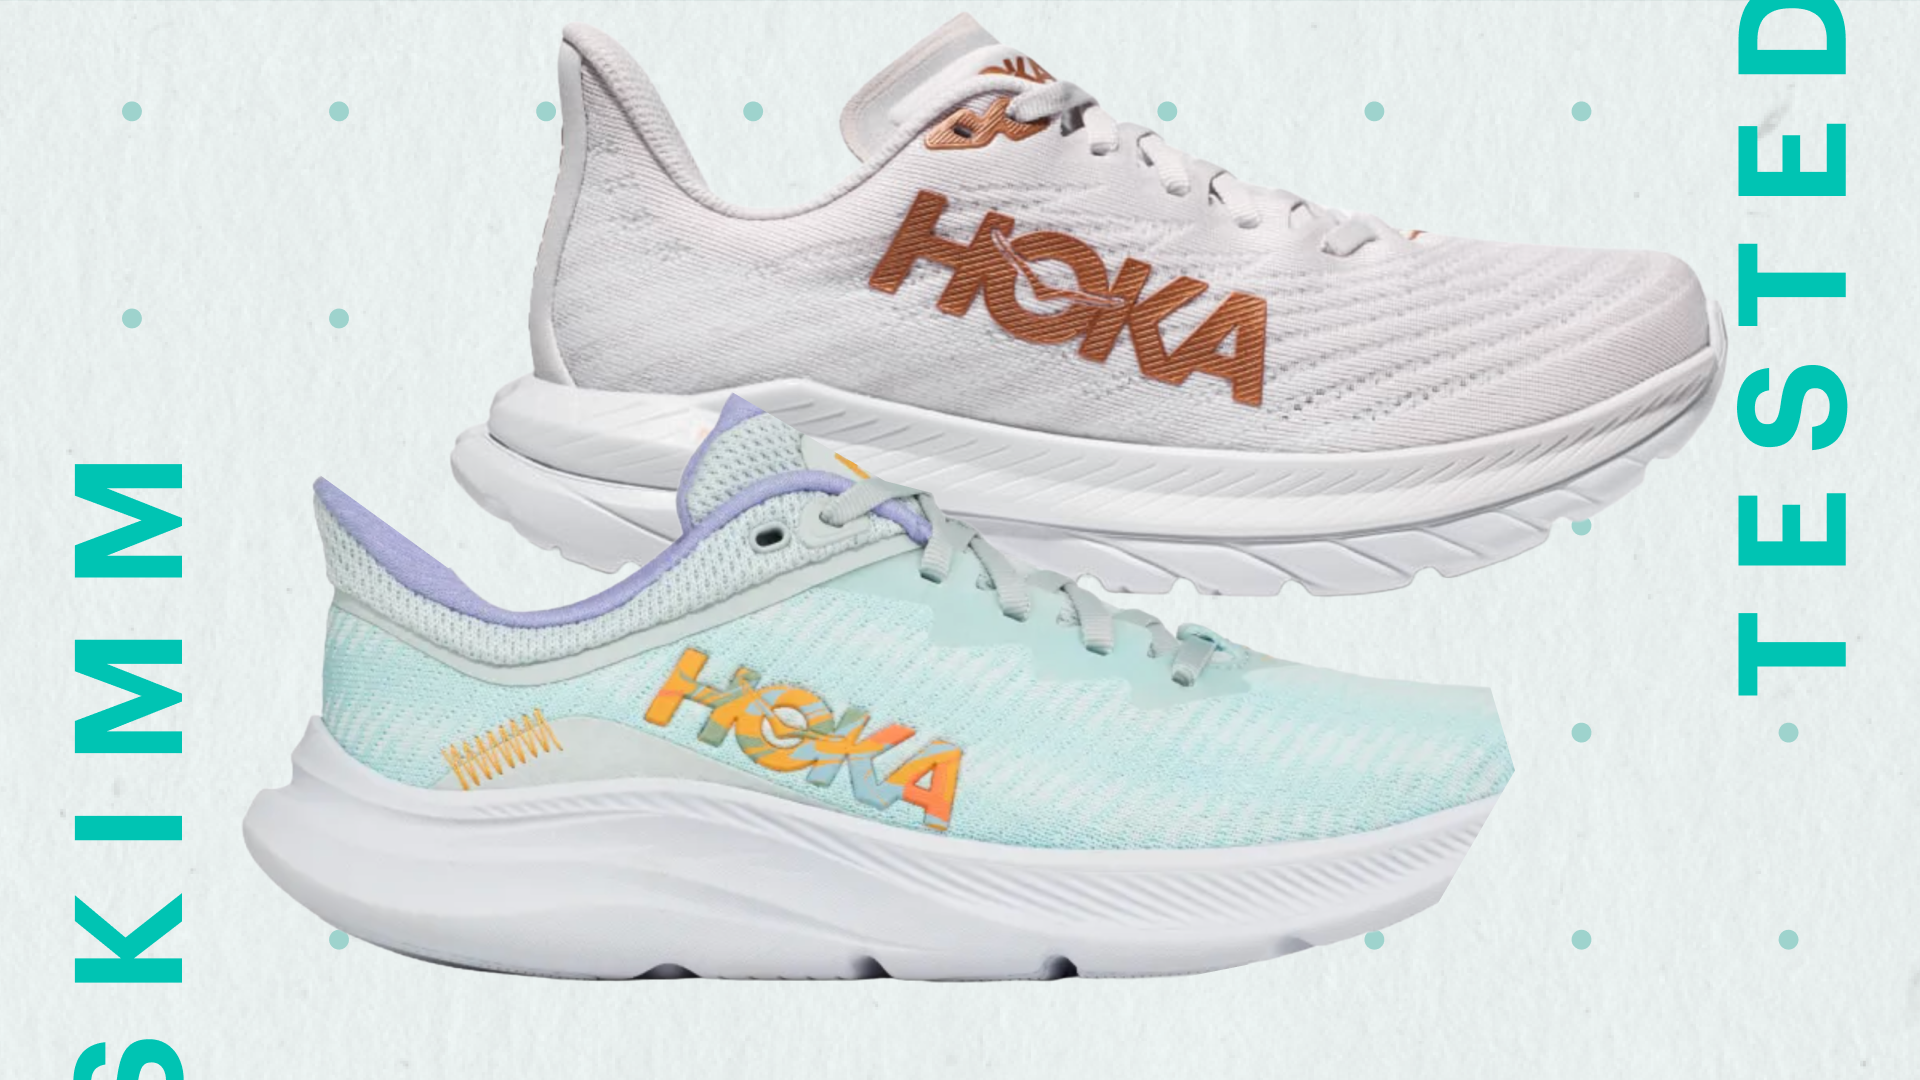 review of hoka running and exercise sneakers